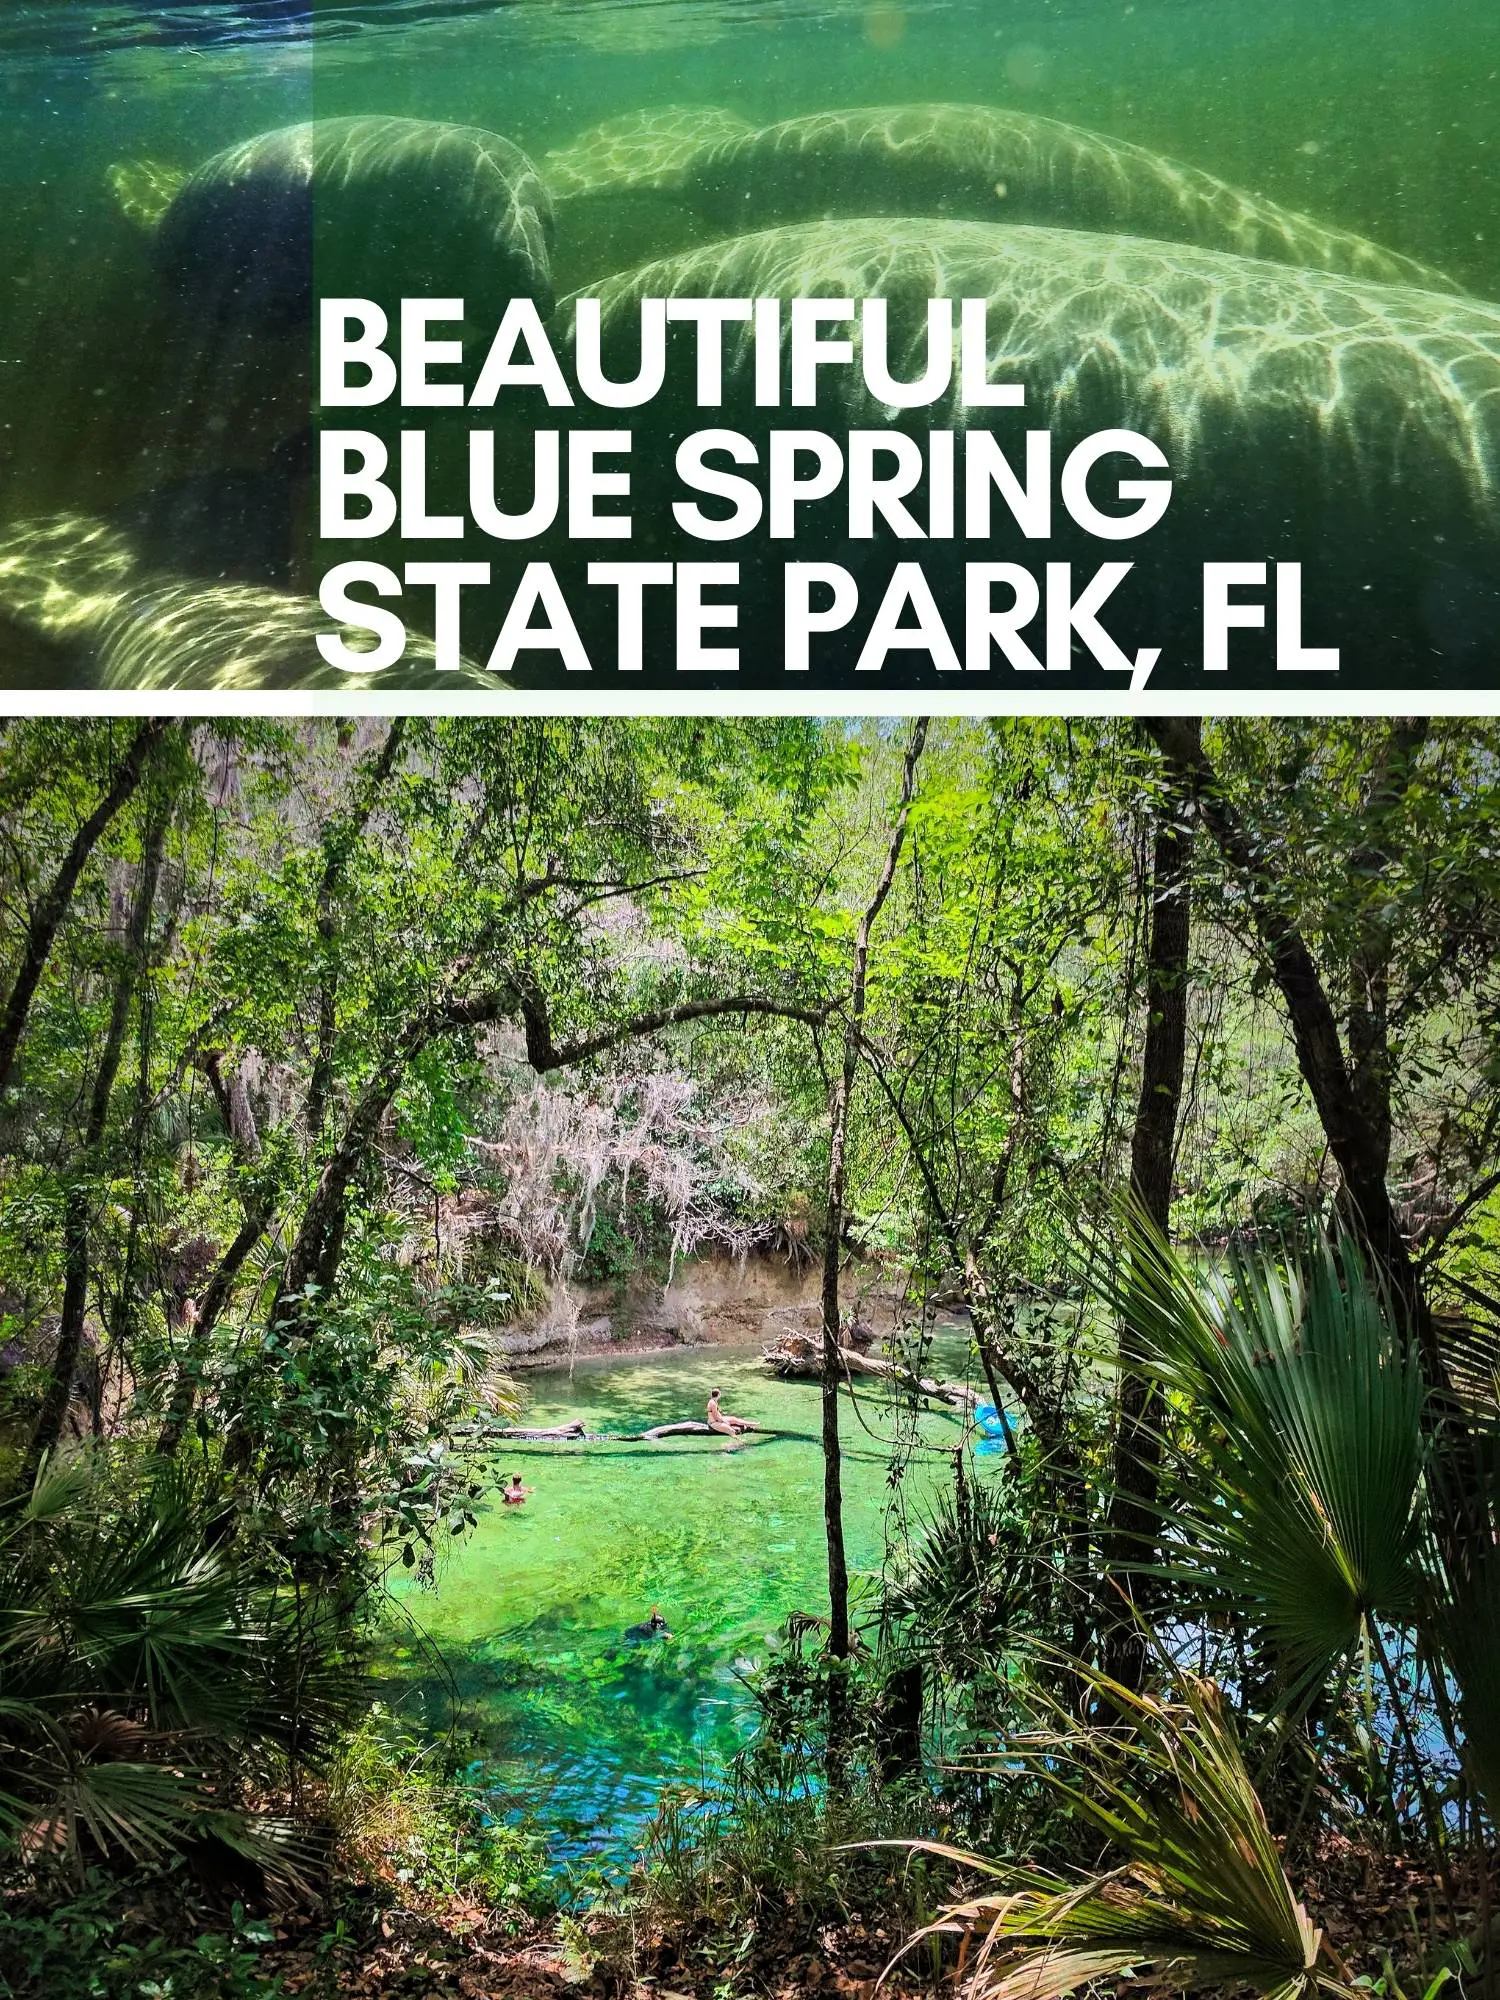 Everything you need to know about Blue Spring State Park, seeing manatees in Florida and swimming in the most beautiful Florida spring water. Things to do, how to get there, and rules for paddling with manatees.